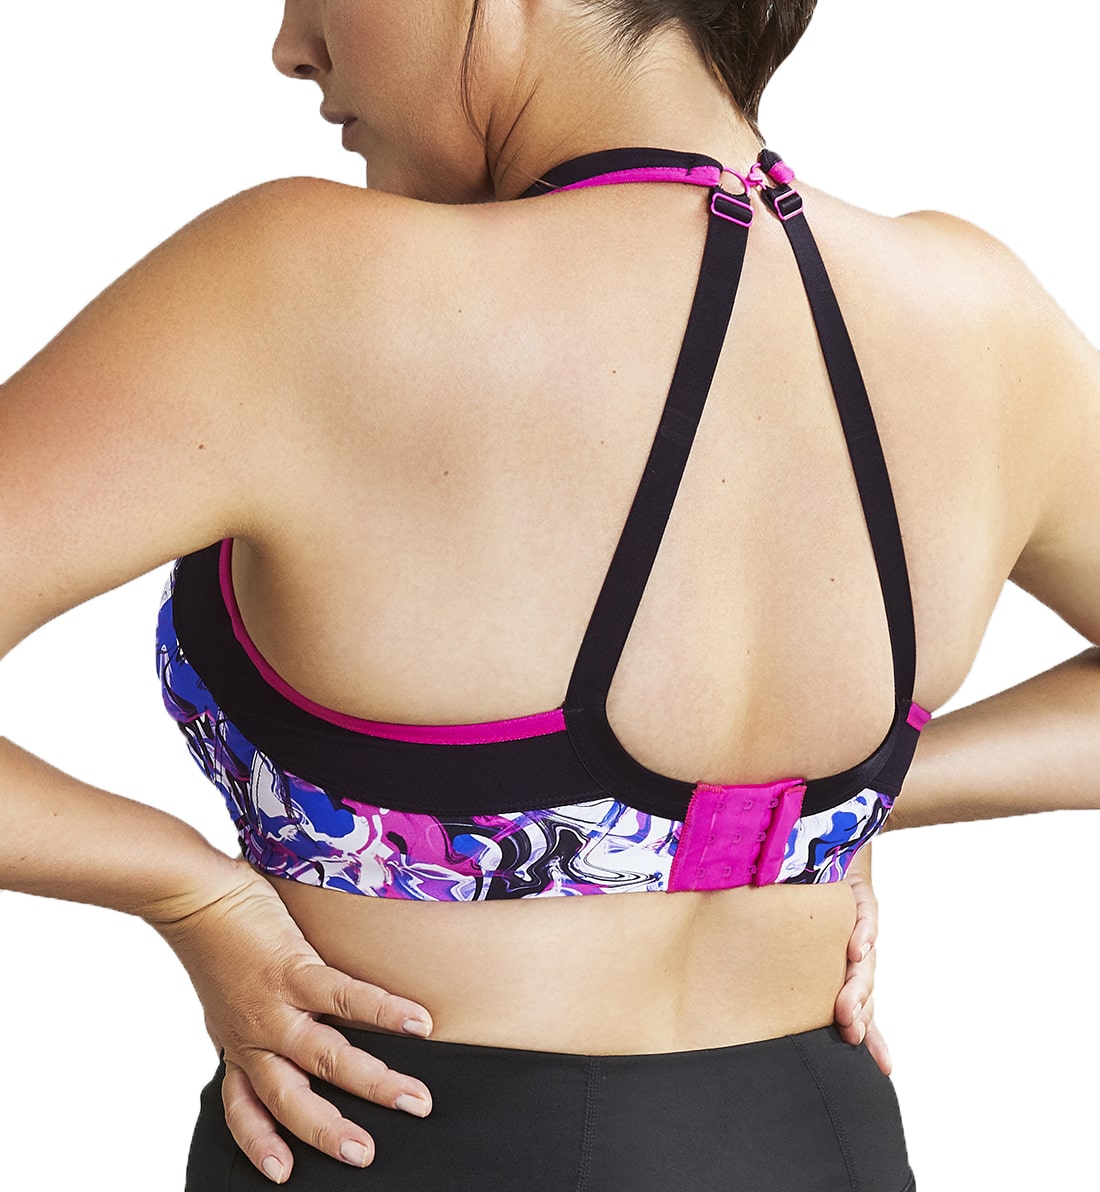 Stay comfortable and supported with the Sculptresse Non Padded Sport Bra